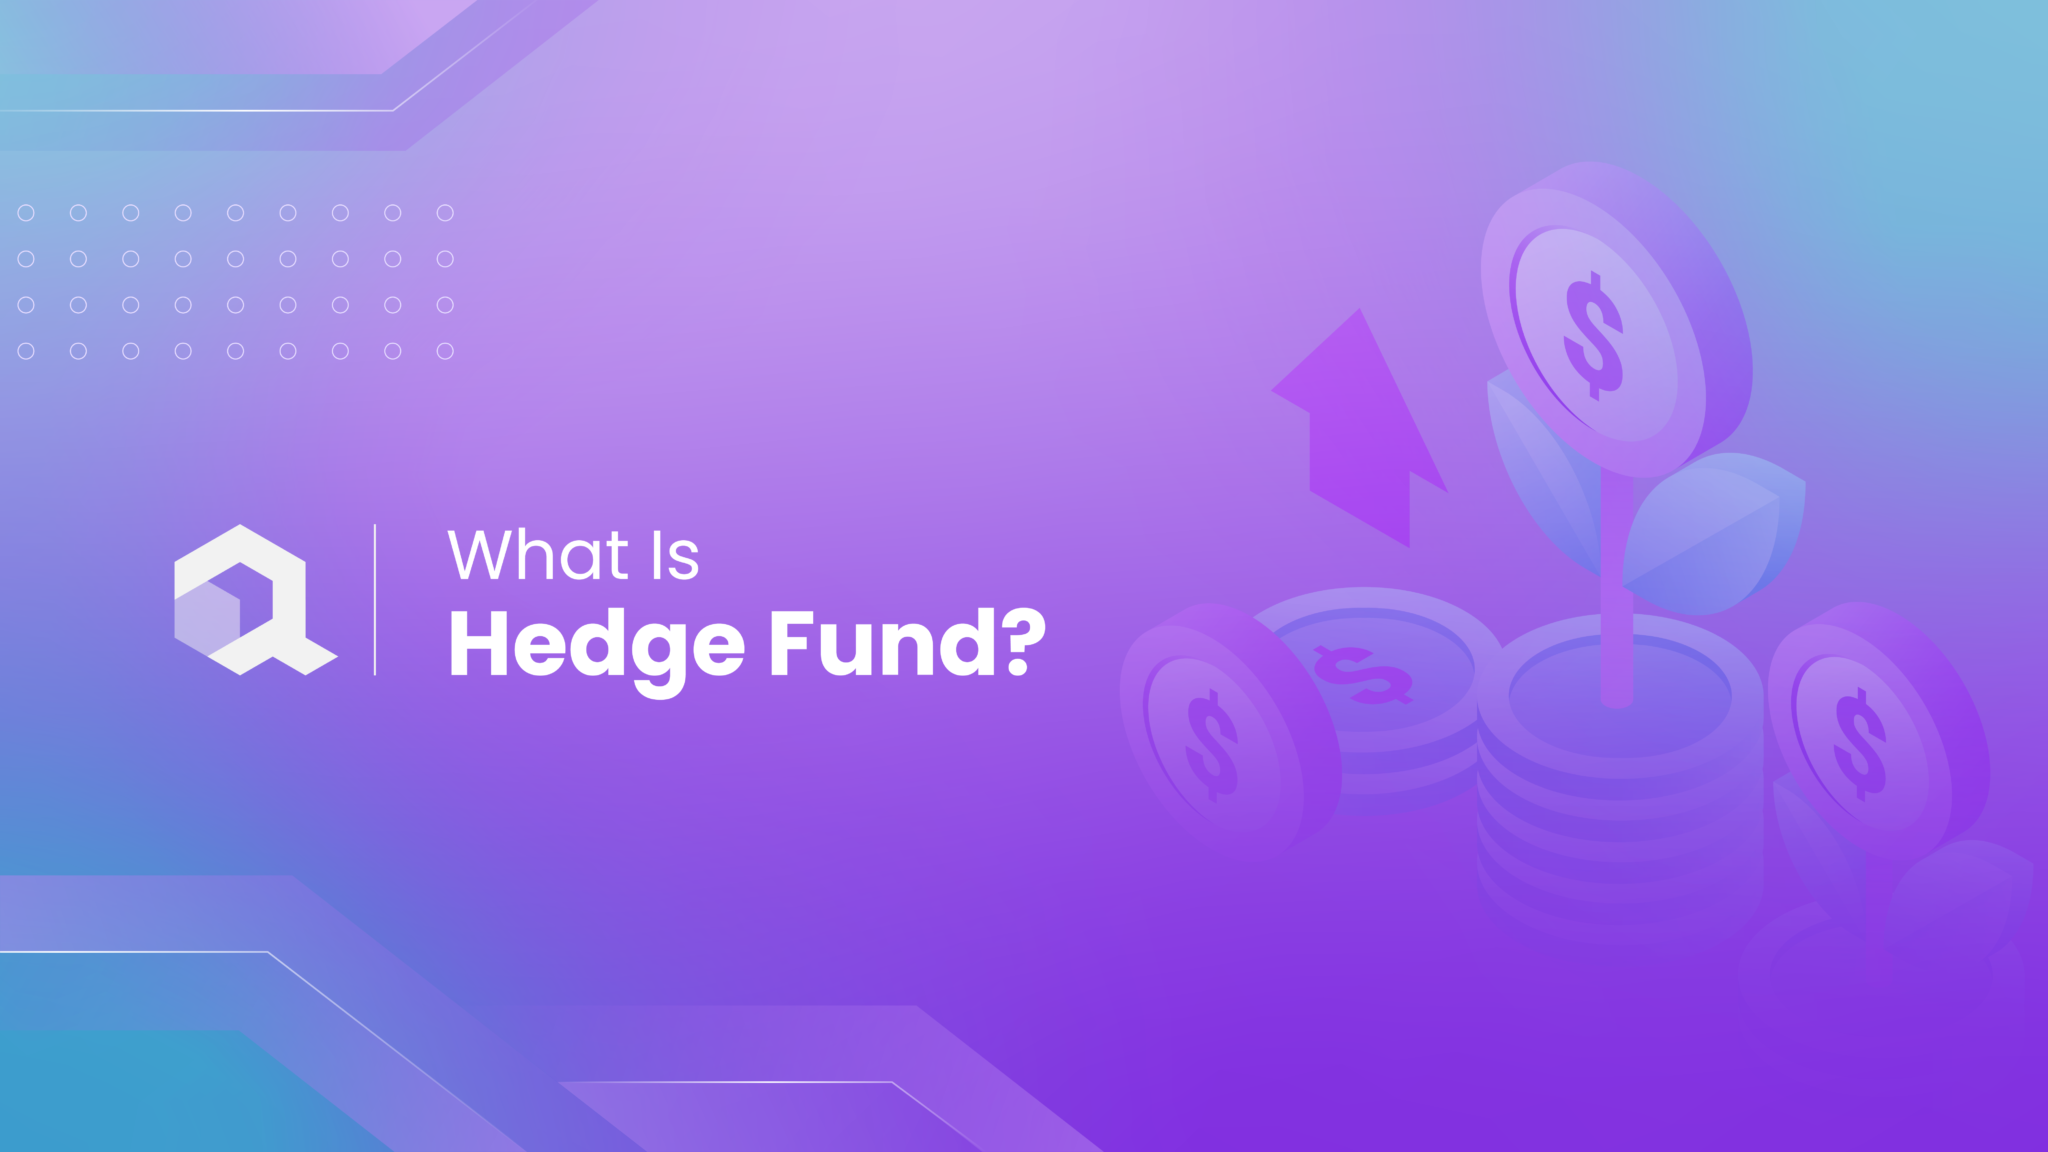 What Is a Hedge Fund